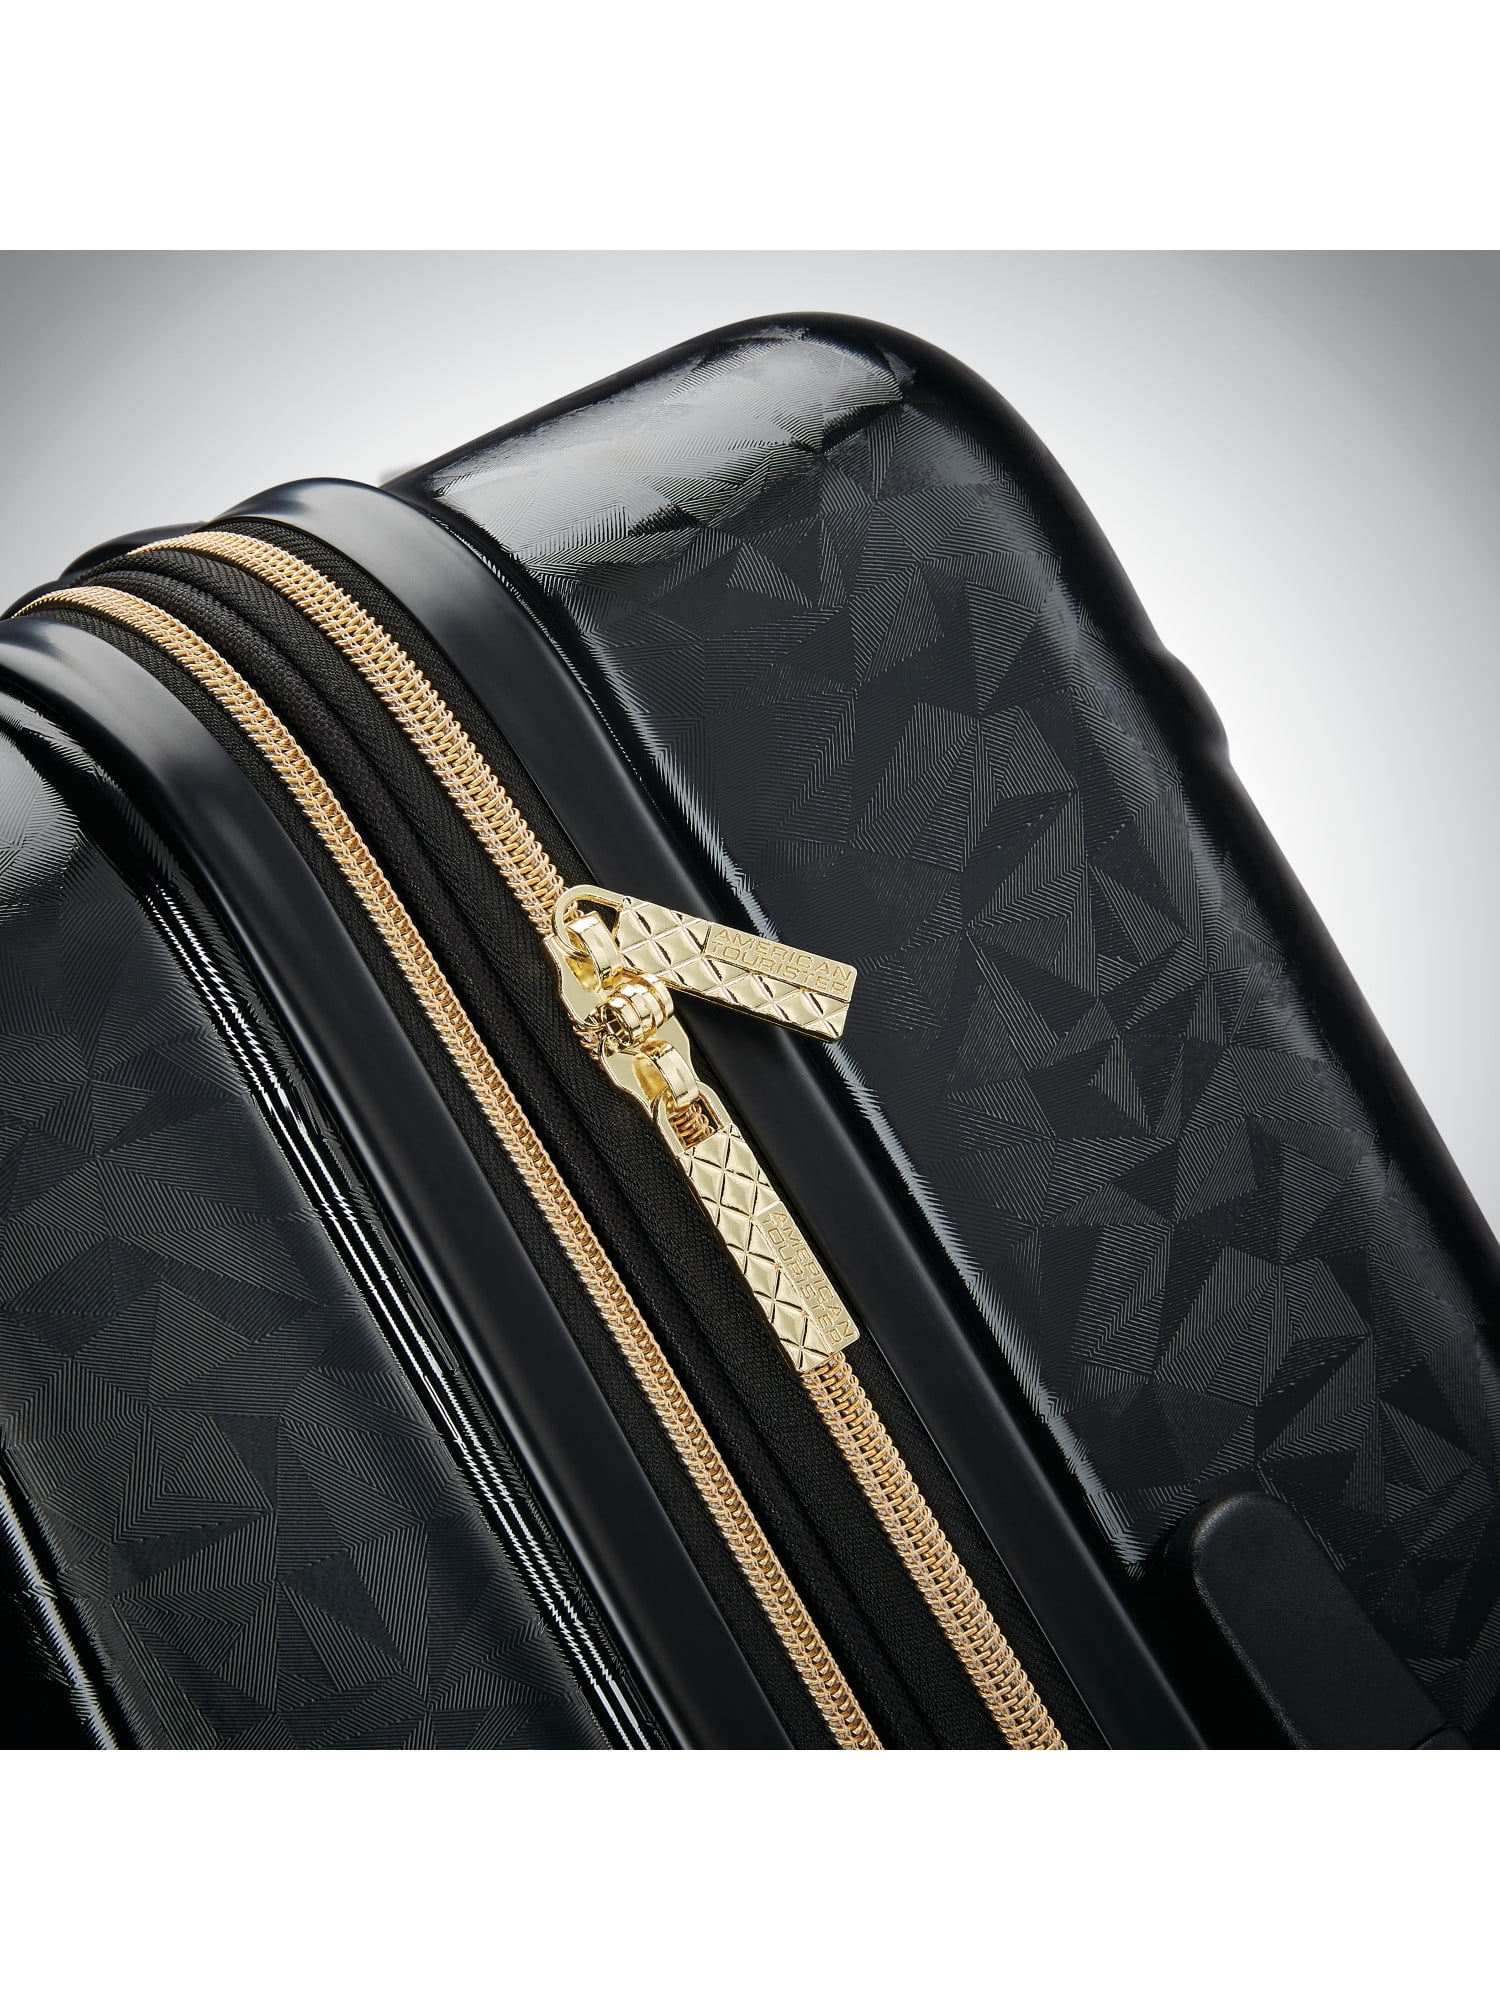 Carry on… in style